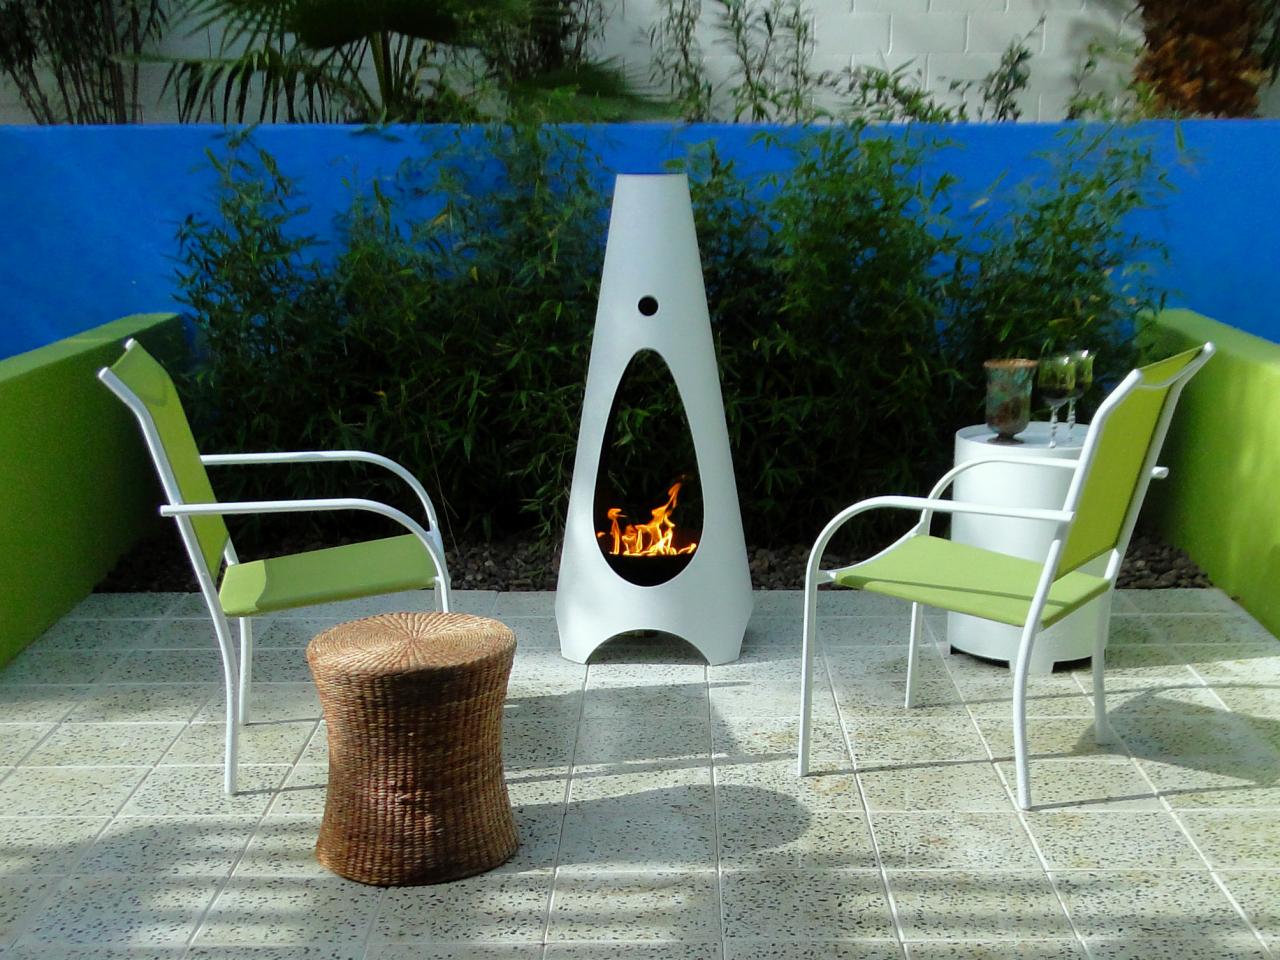 Chiminea design with matching material with the furniture